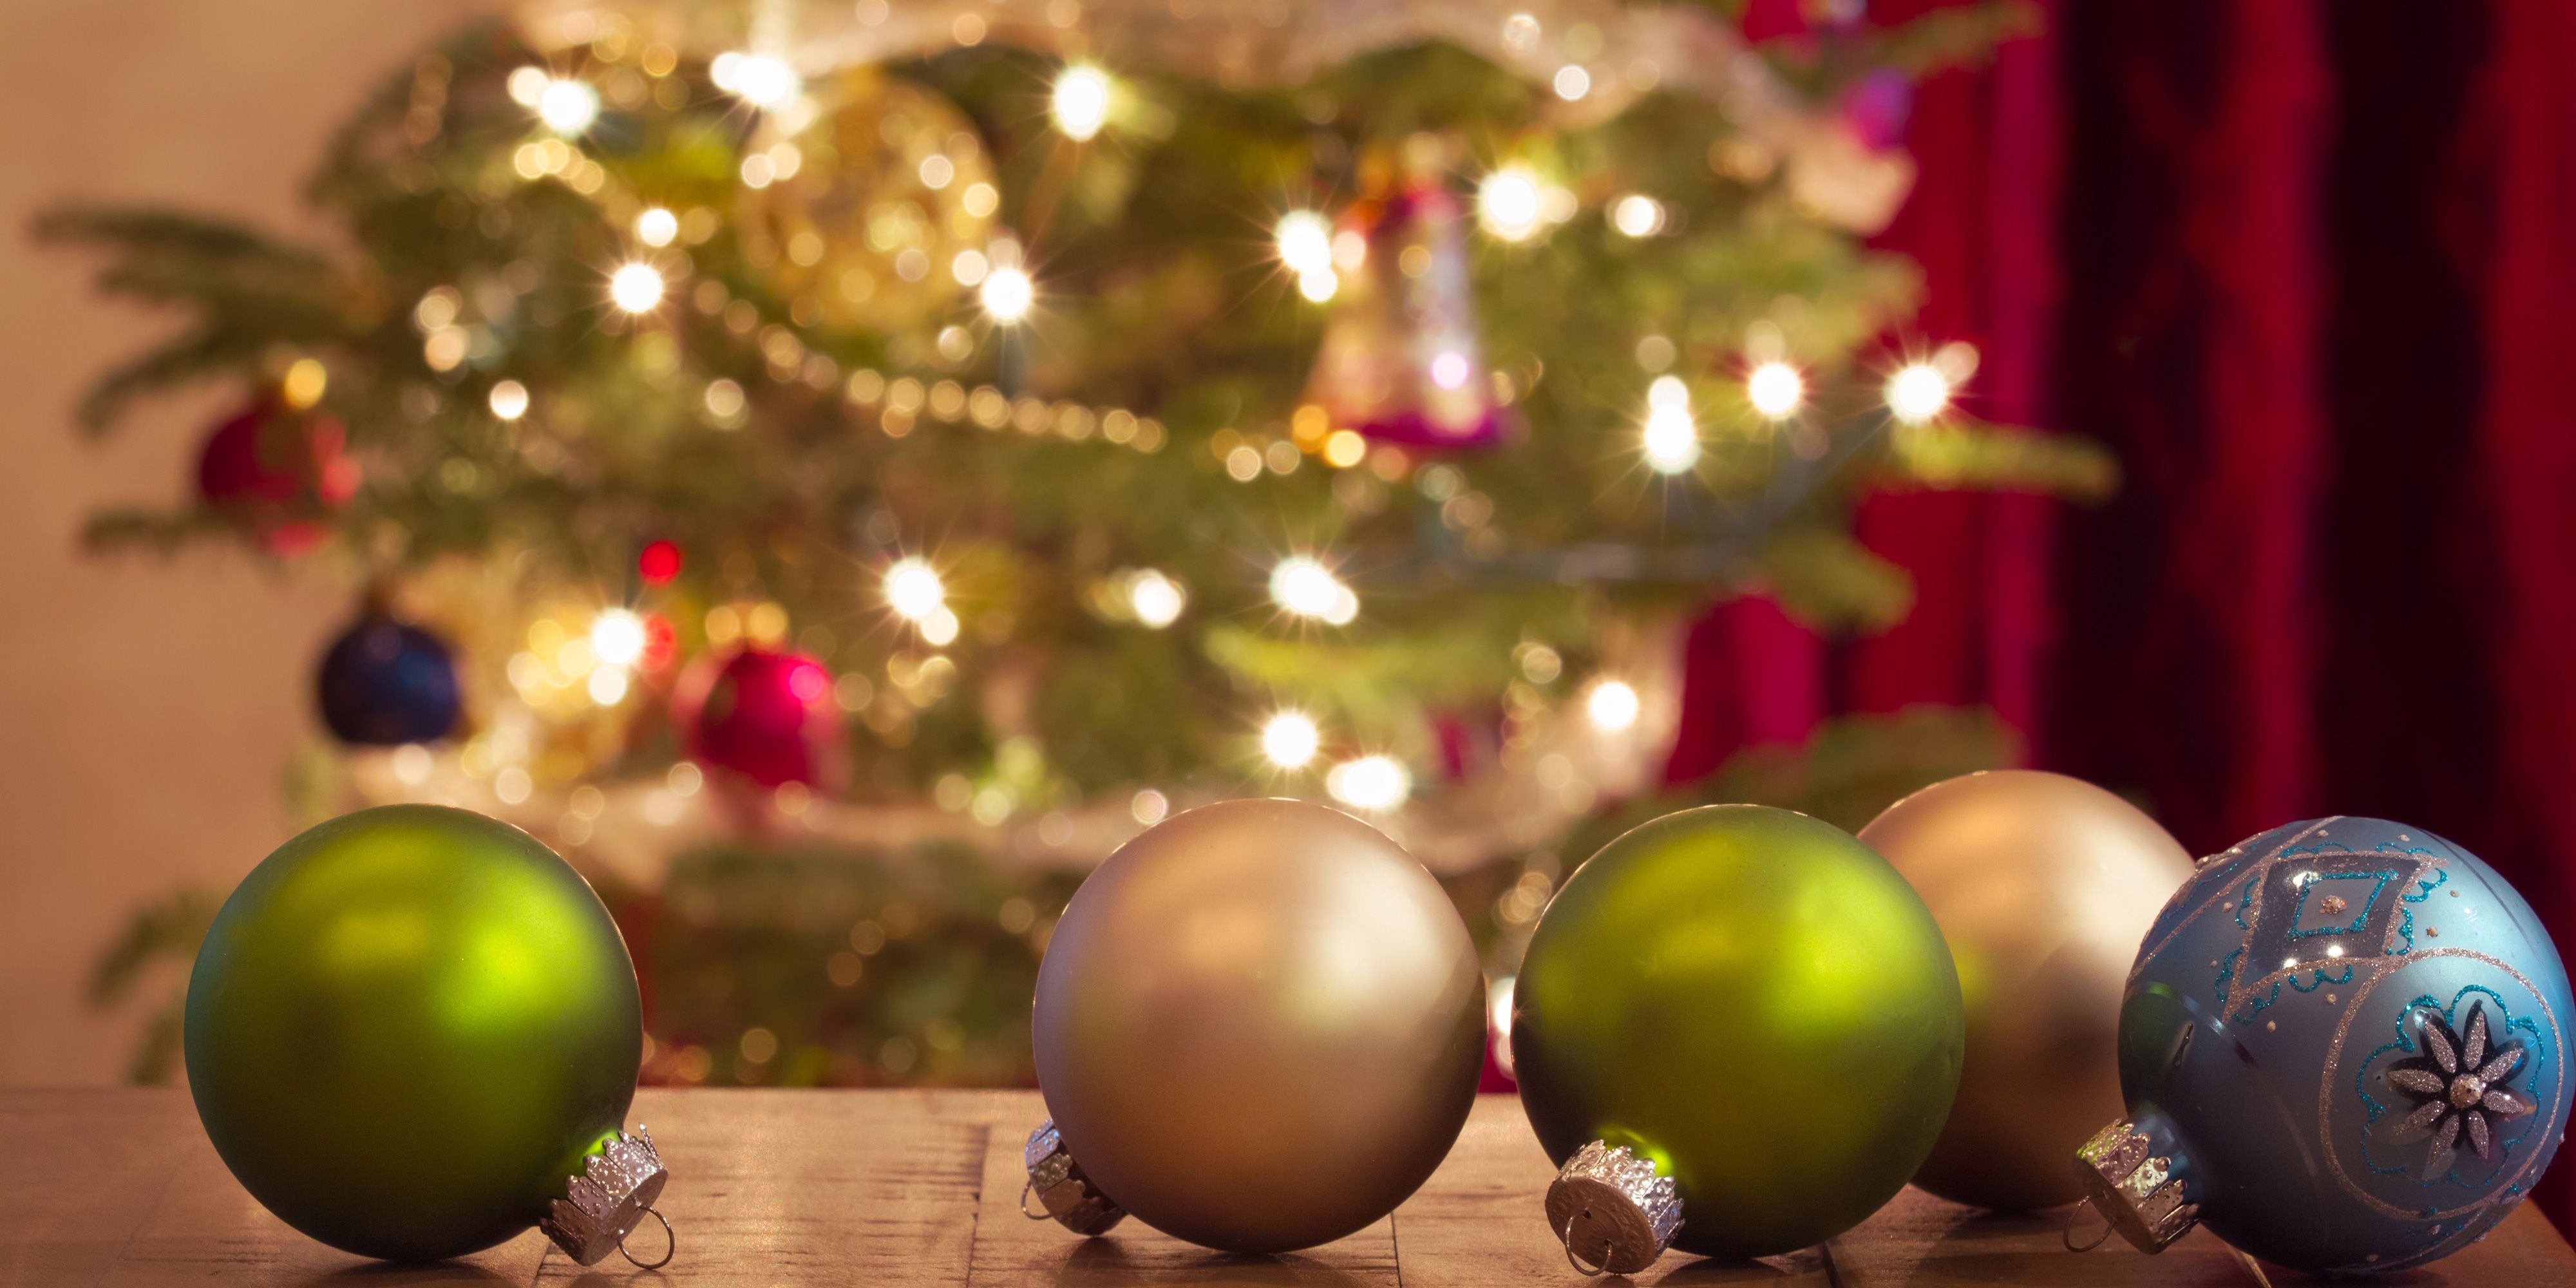 Why a psychologist believes putting up your Christmas decorations